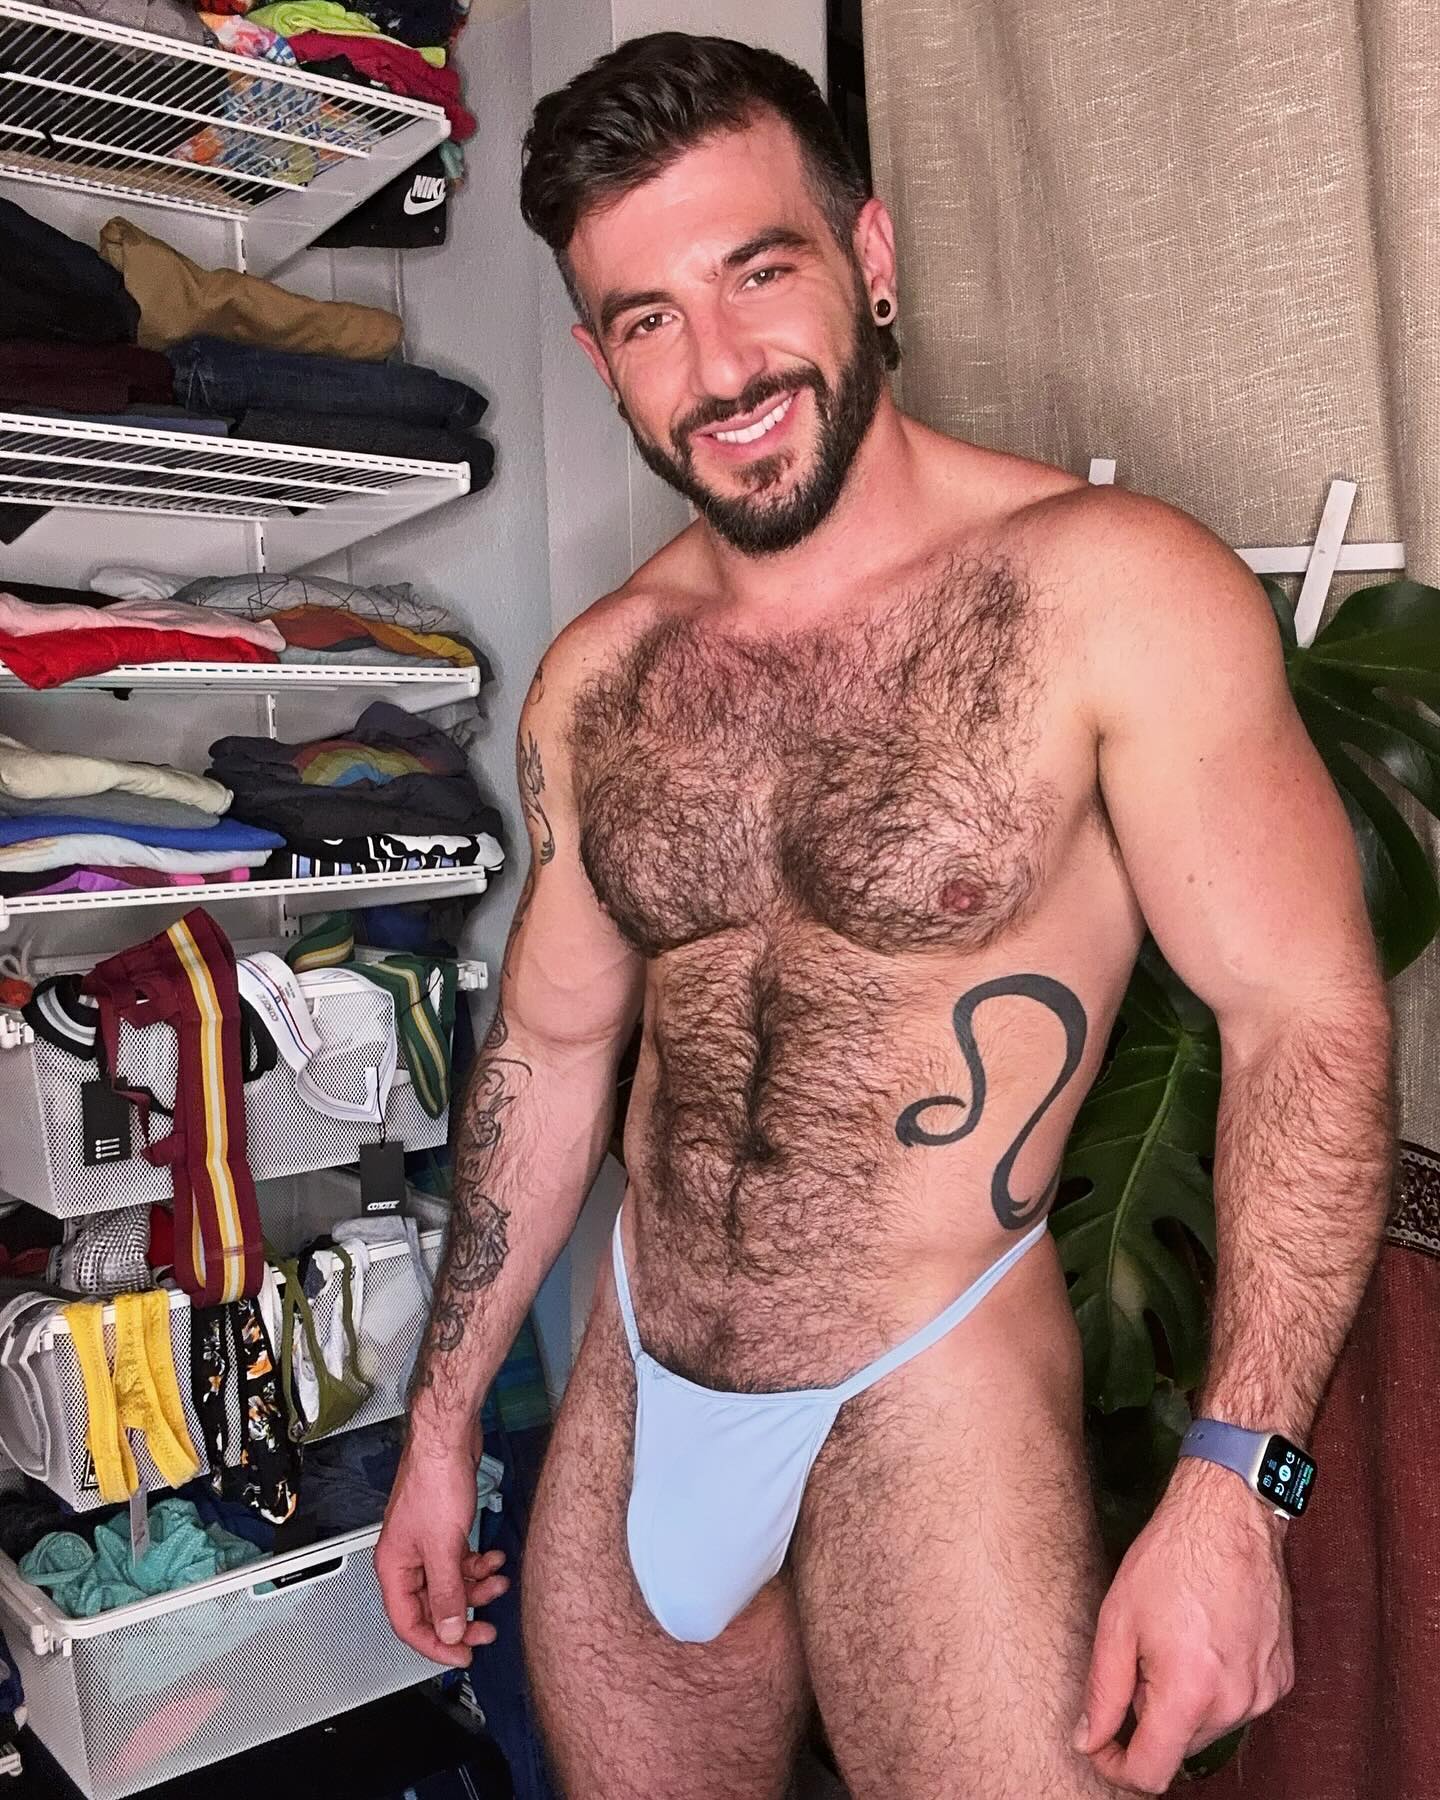 Got some new skimpy underwear in… should I do some photoshoots with em?

.

.

.

.

.

#thong #blackthong #hairyscruffyhomo #hairymusclecub #hairymusclejock #hairygayman #hairygayguy #hairymenlovers #hairymens #hairygays #hairybooty #furrybutt #hairybutt #furryass